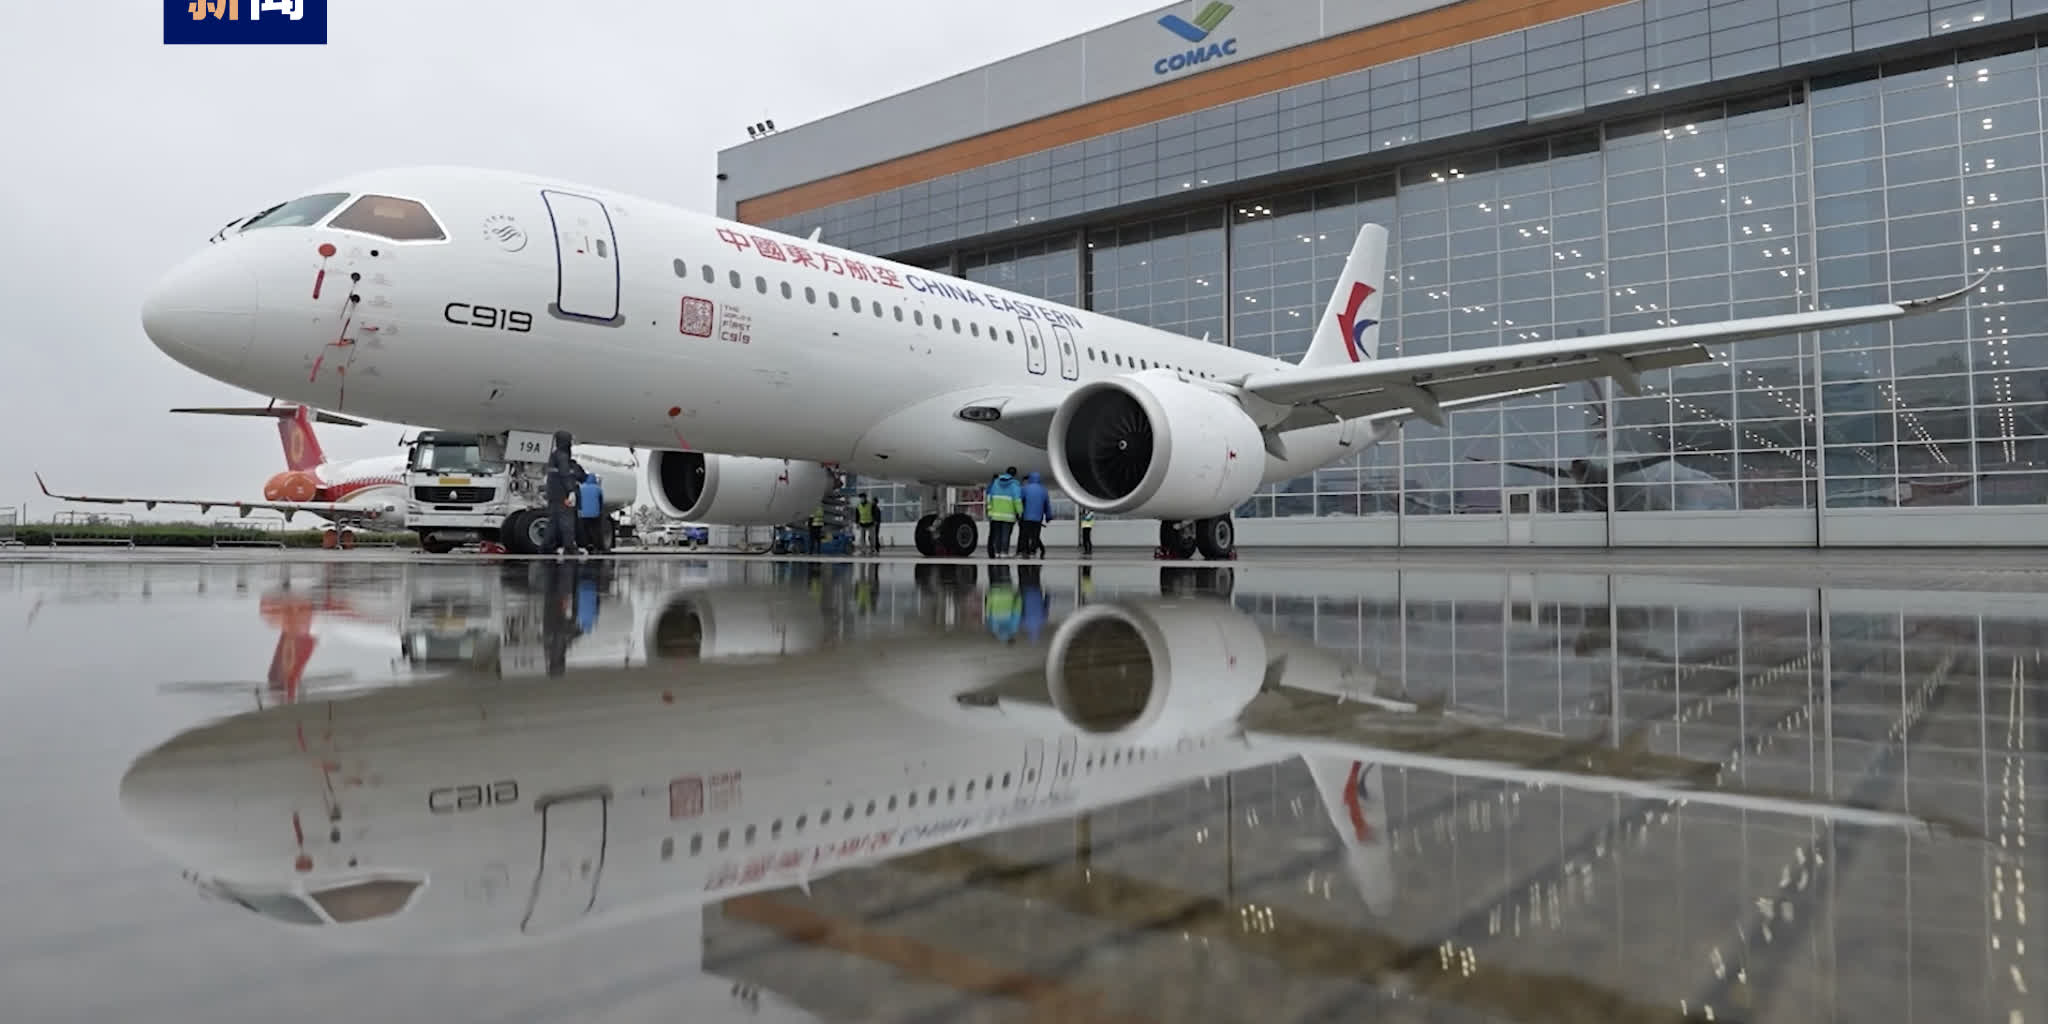 C919 aircraft to enter commercial operations soon: China Eastern Airlines